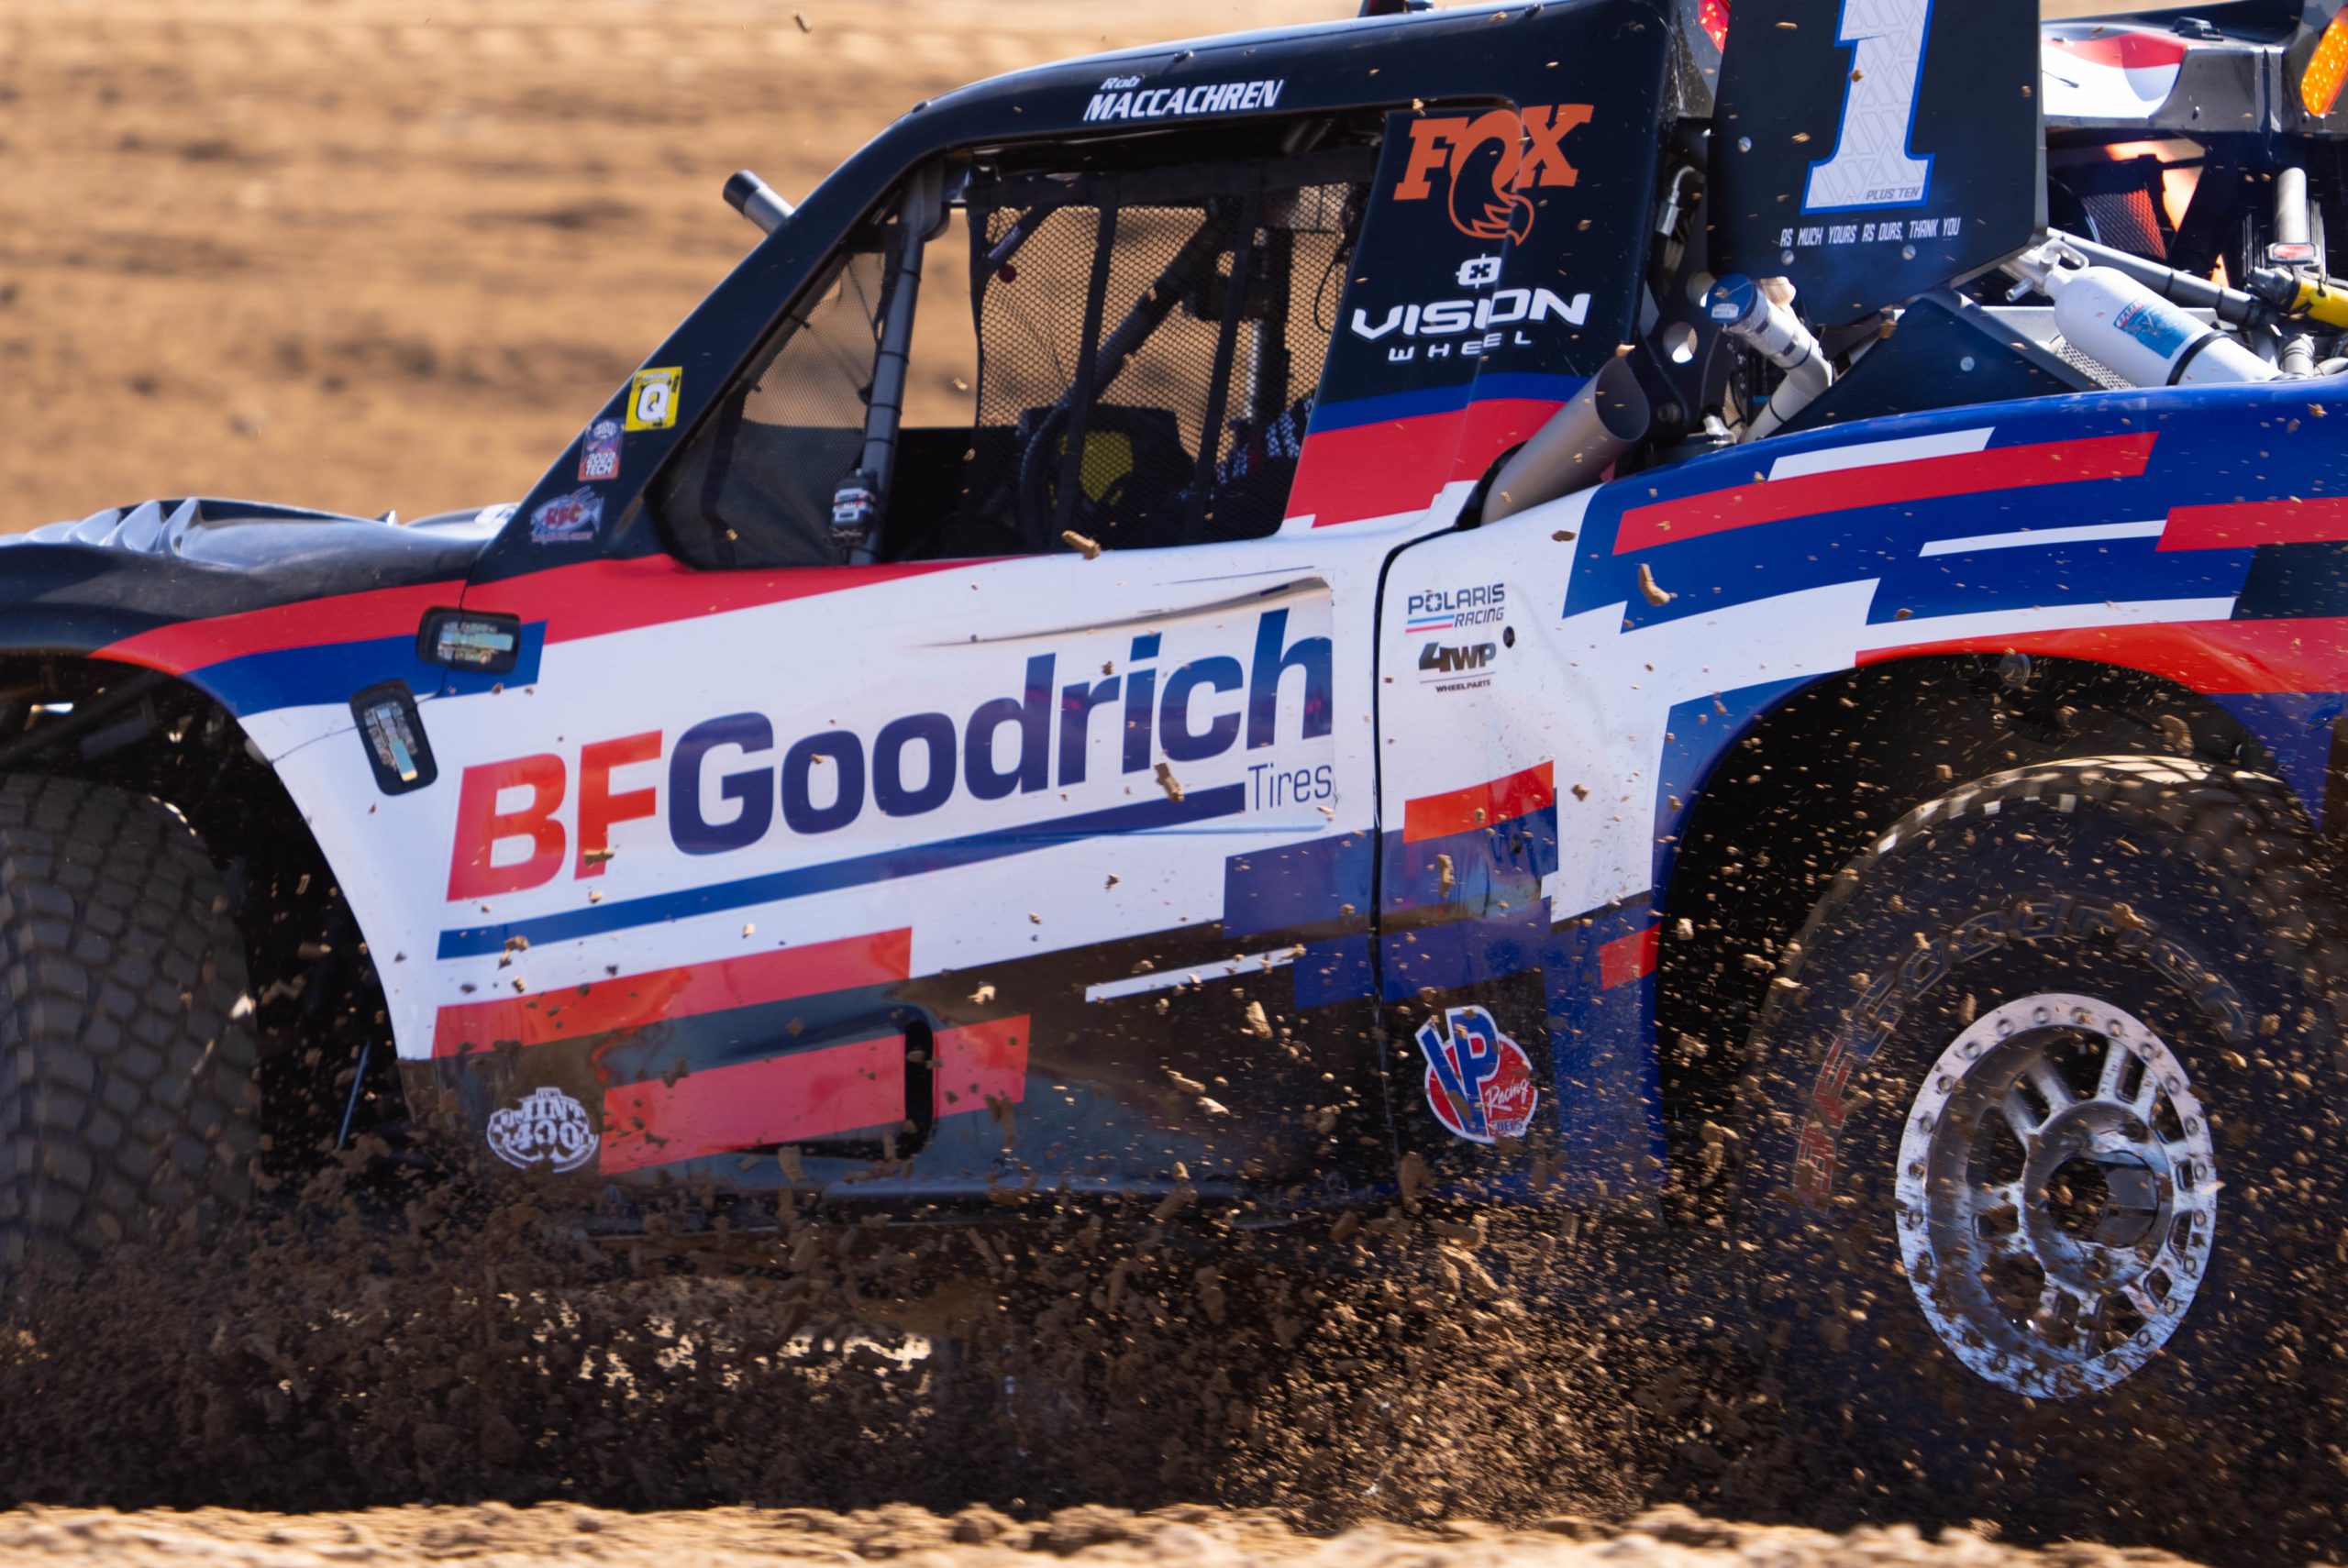 Drag racing legend Rob MacCachren, in his BF Goodrich off-road racing trophy truck. The photo is an action shot during a desert race